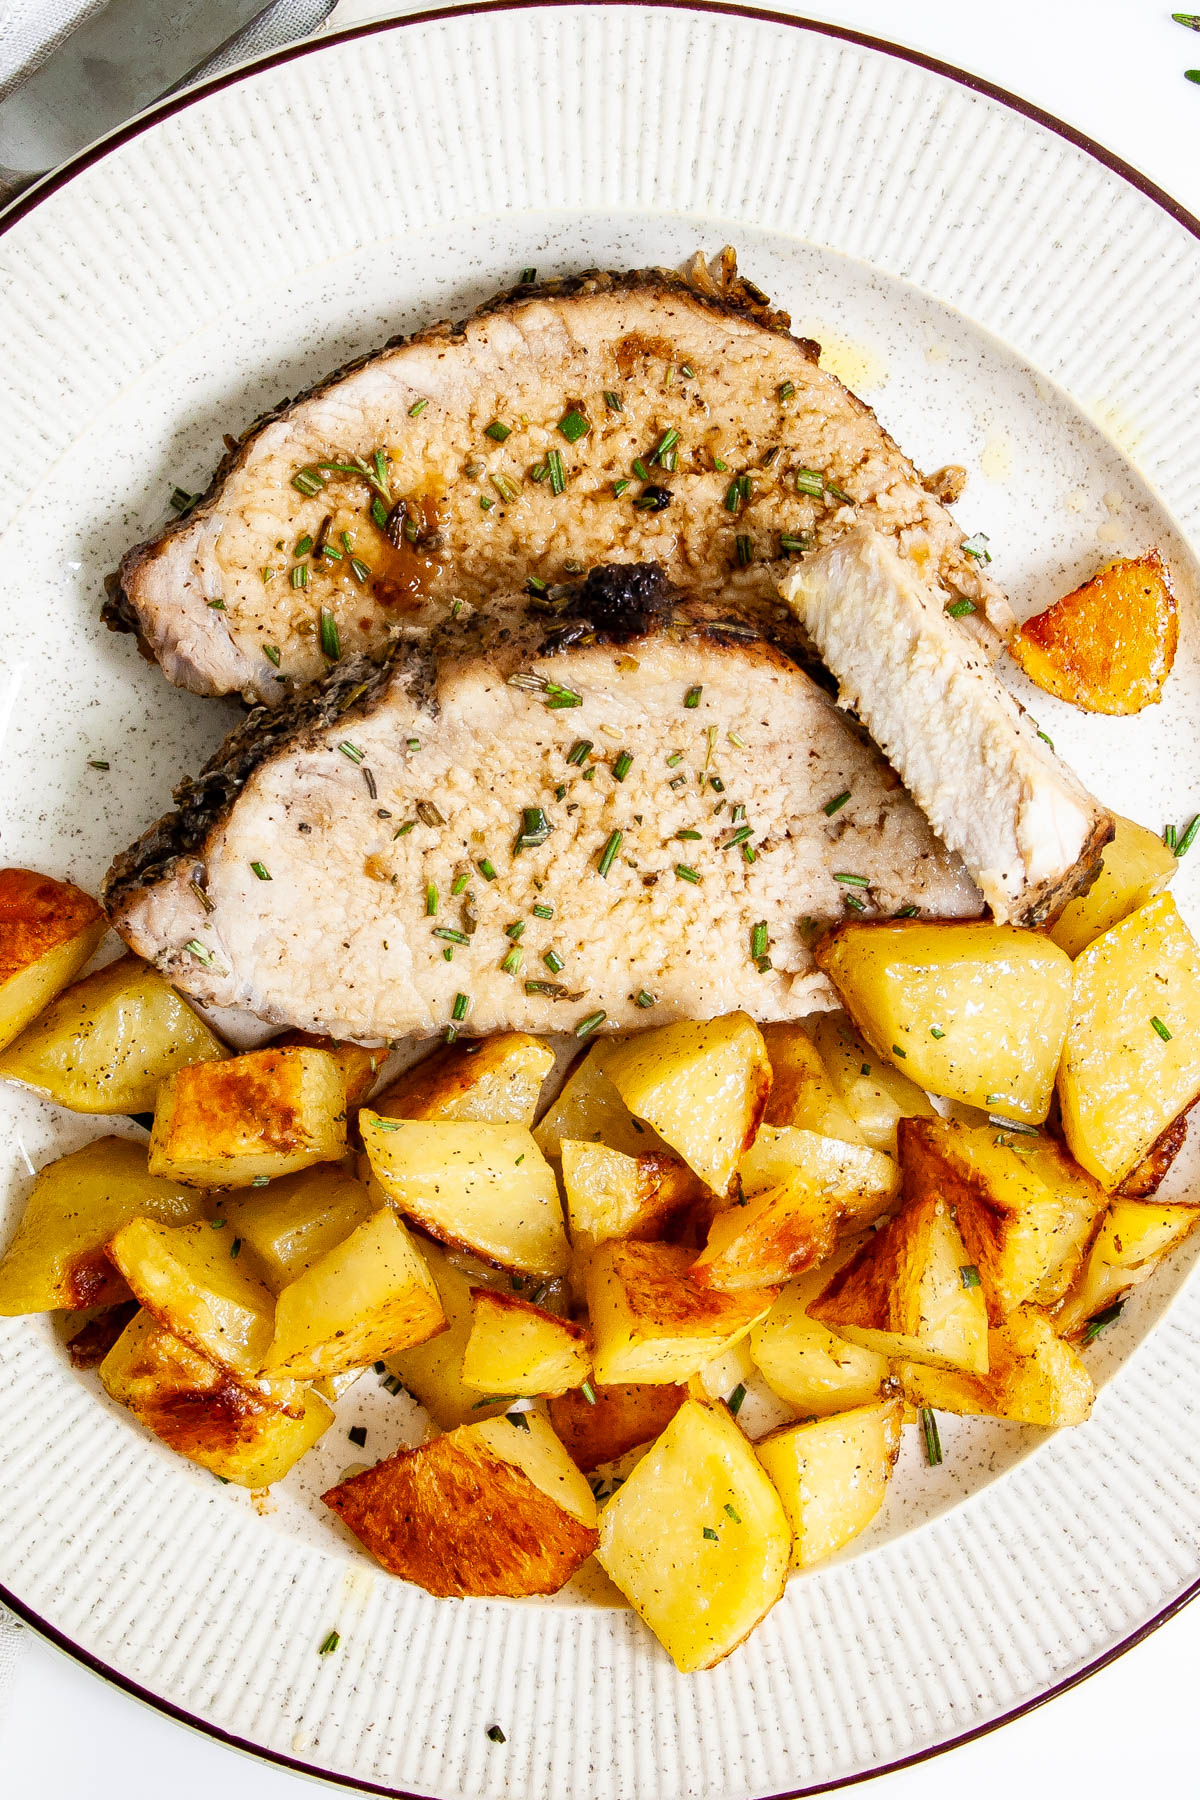 Pork Loin Roast slices with roasted potatoes on a plate